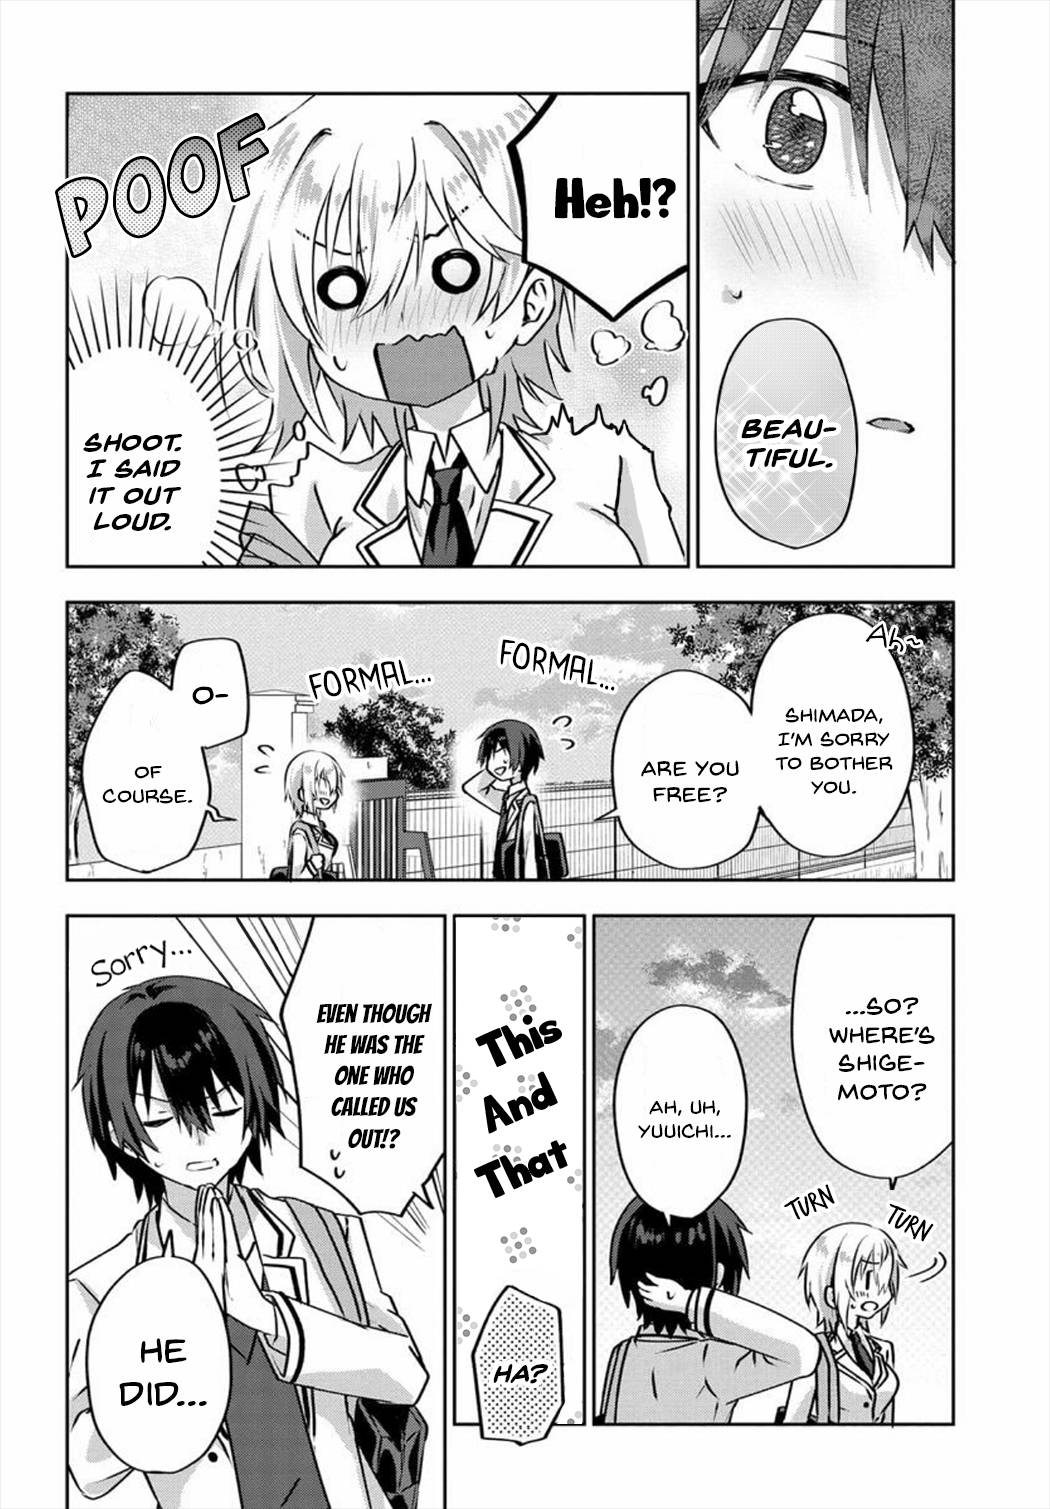 Since I’Ve Entered The World Of Romantic Comedy Manga, I’Ll Do My Best To Make The Losing Heroine Happy - chapter 3.5 - #4